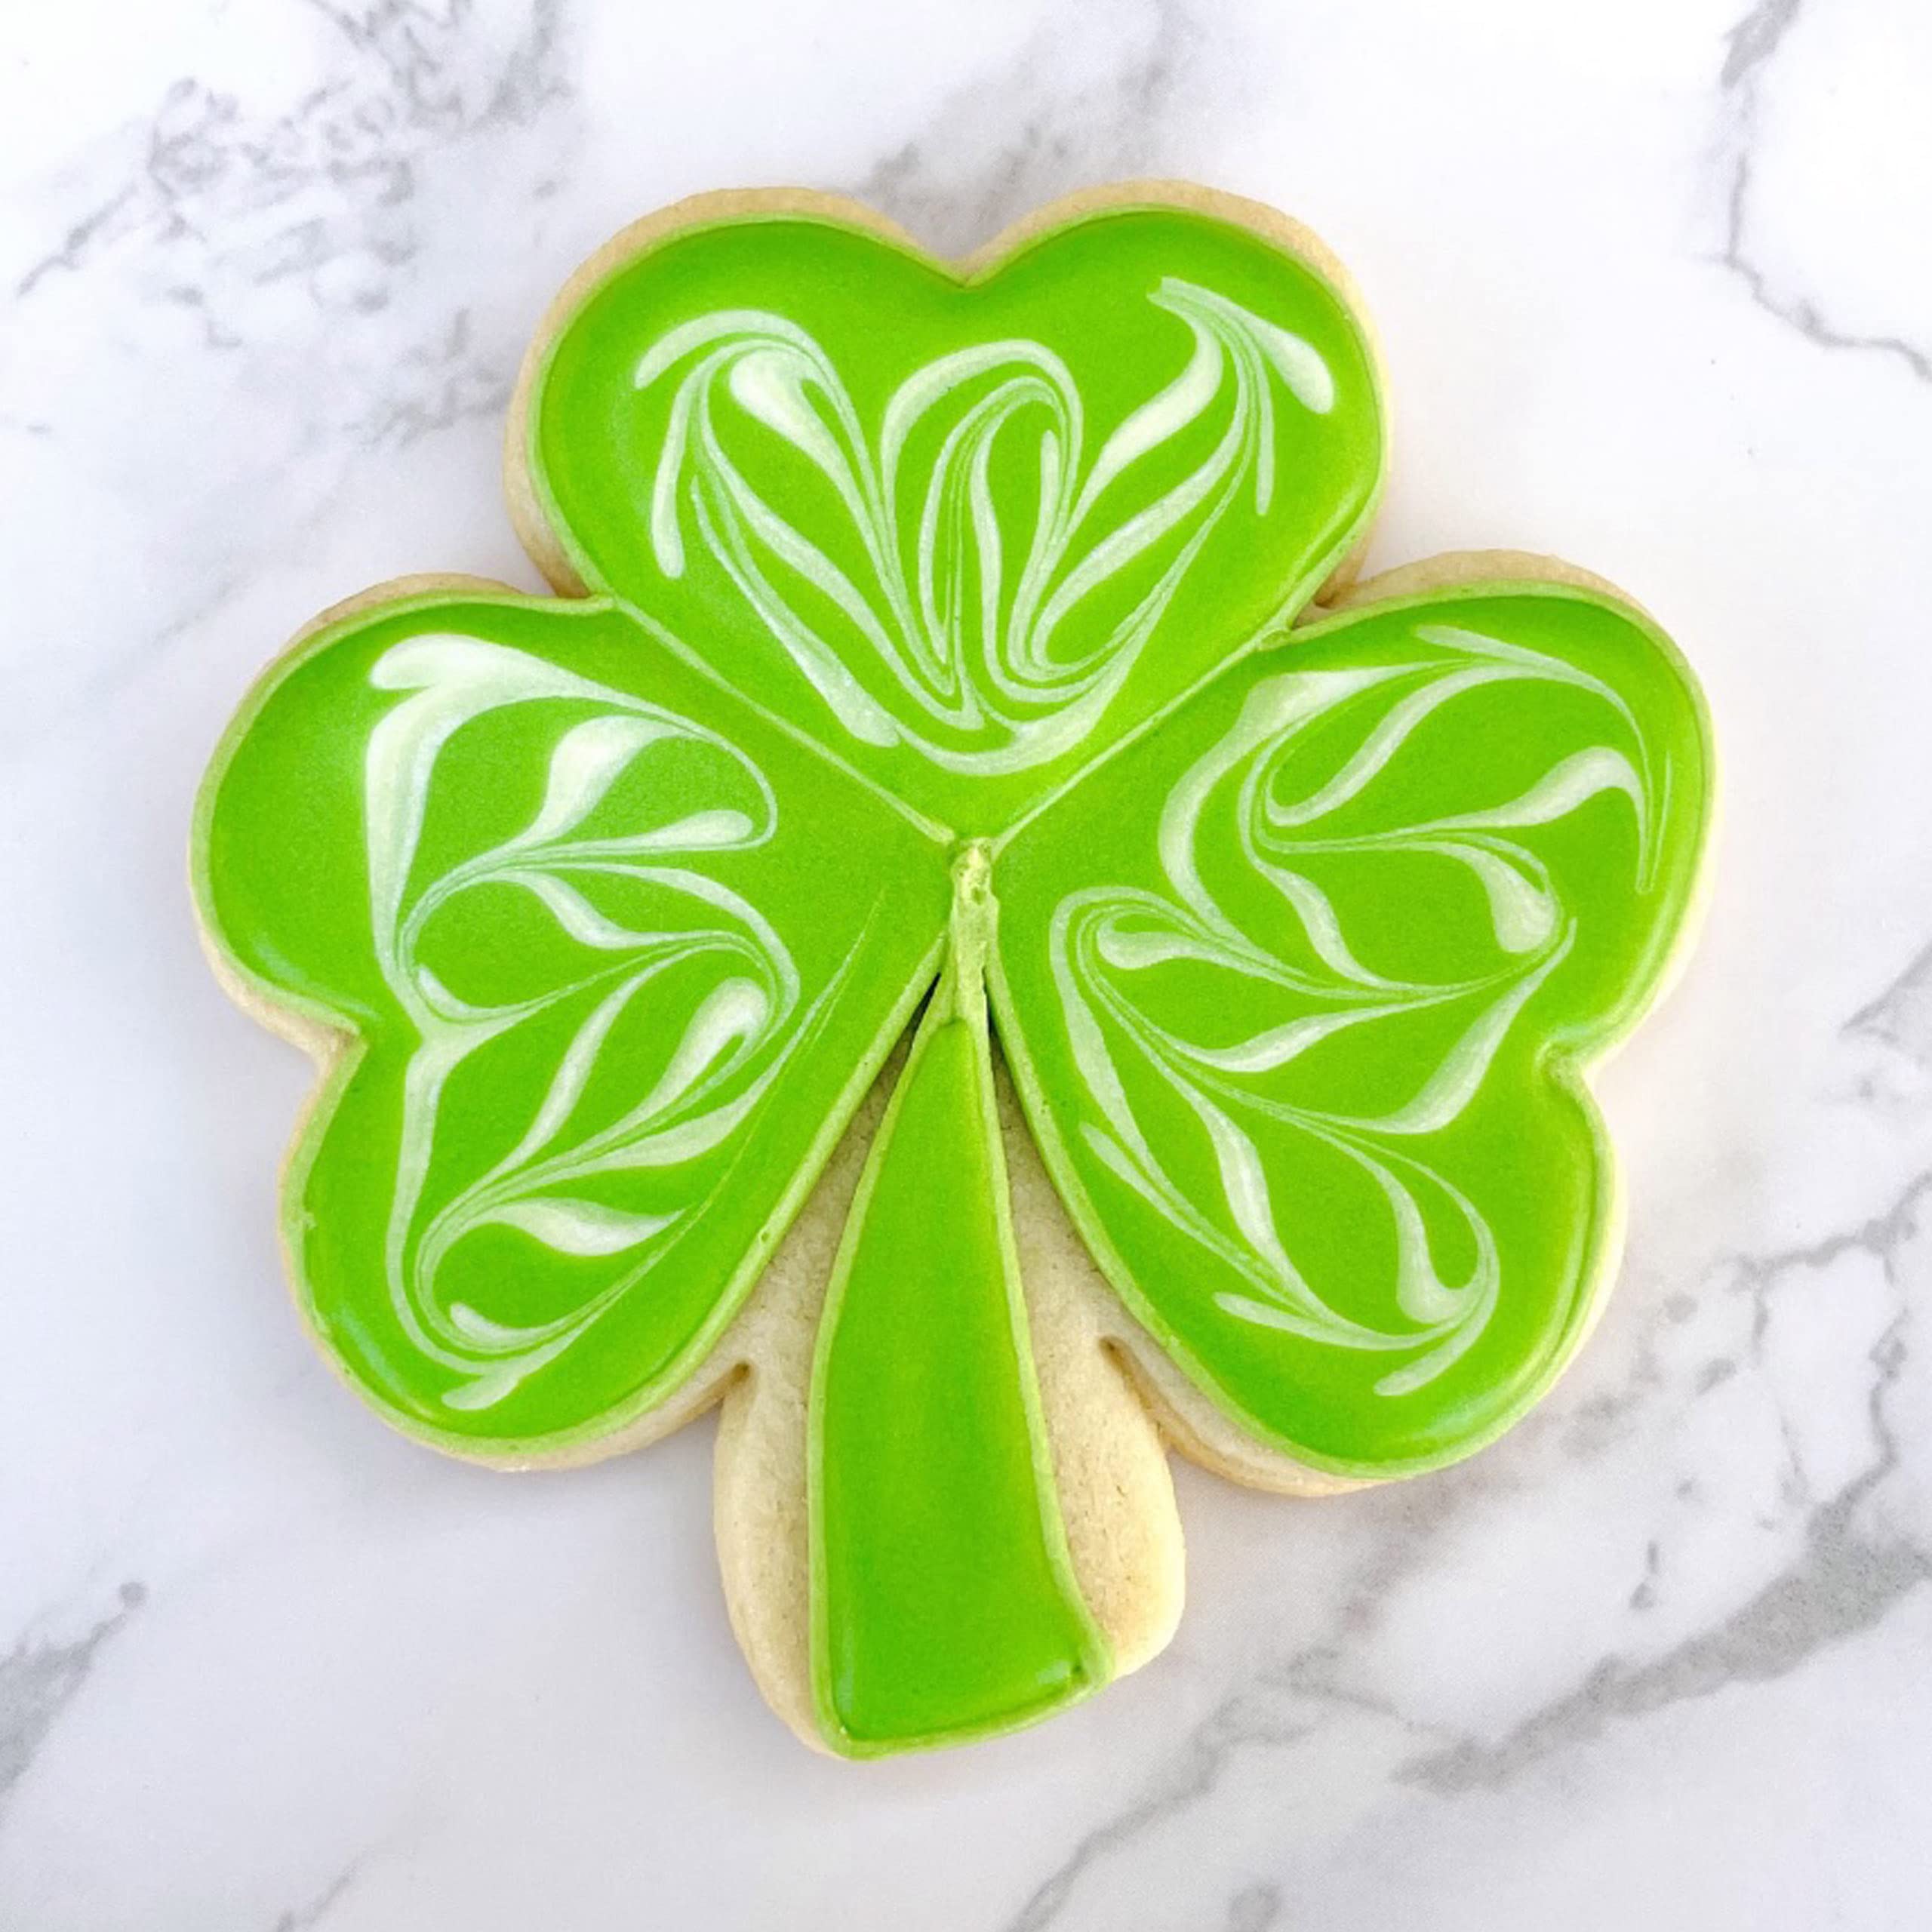 Small Shamrock Cookie Cutter, 3.25" Made in USA by Ann Clark